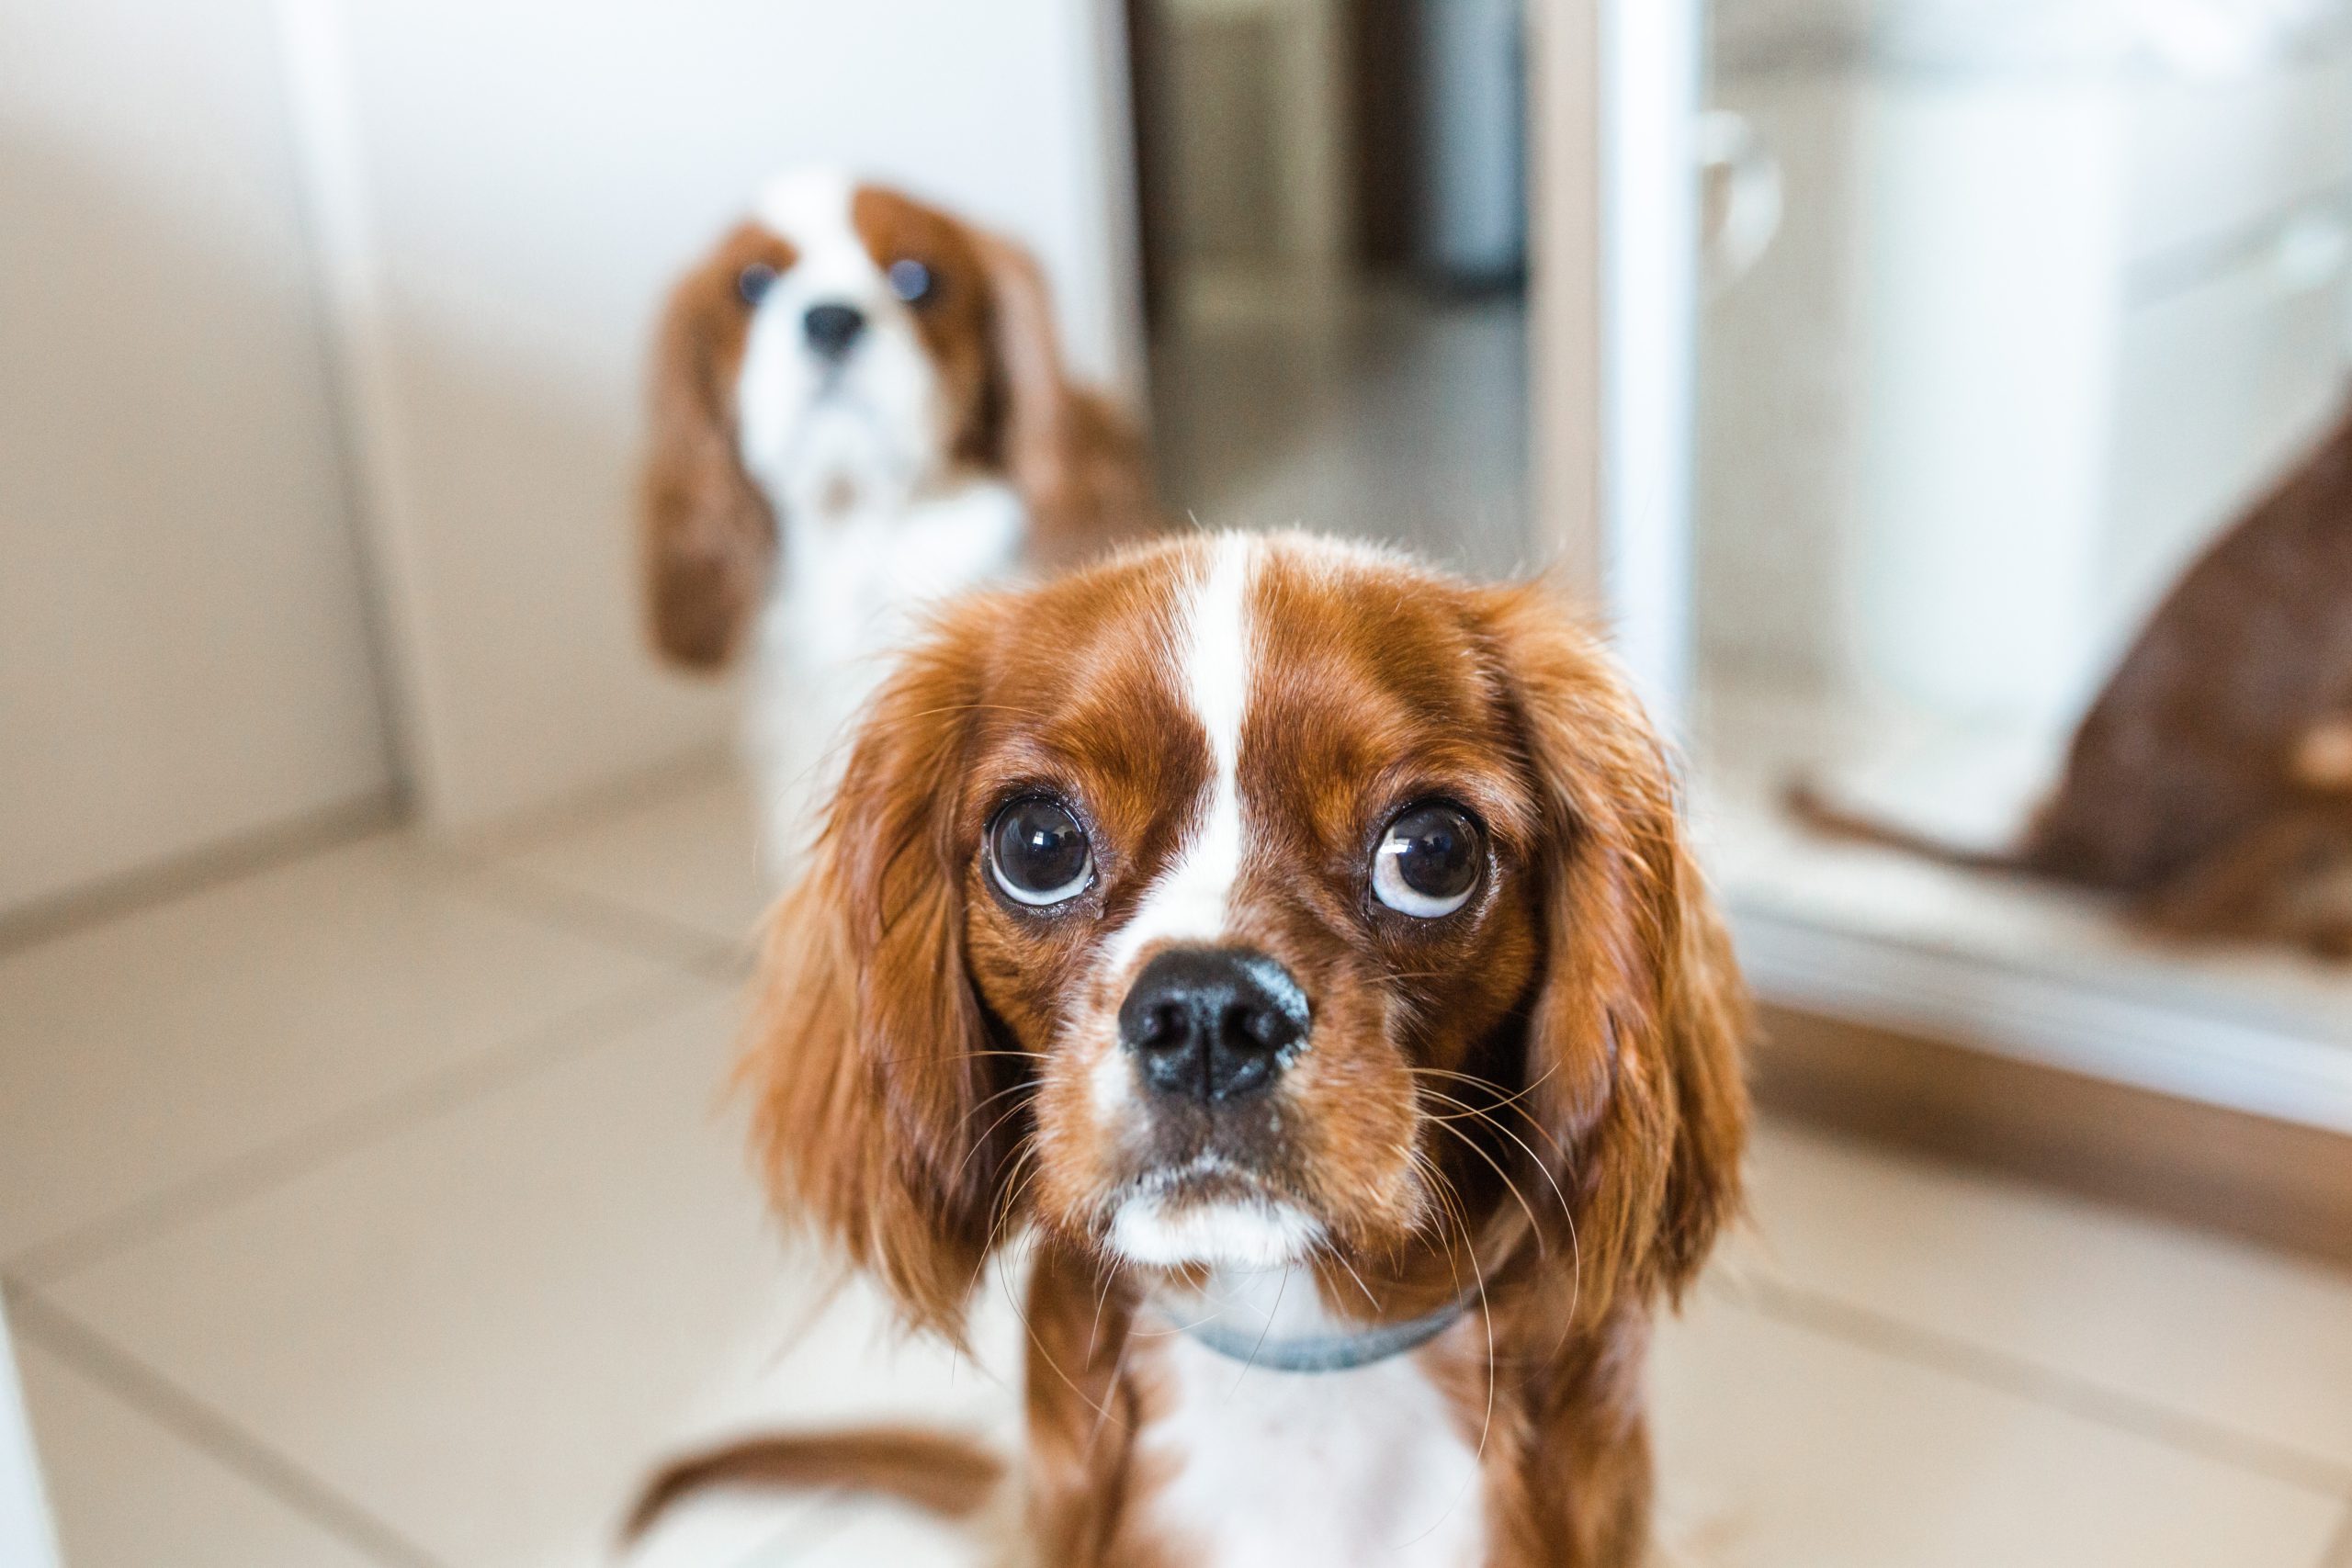 The Complete Guide to Cavalier King Charles Spaniels: History, Care, and Training Tips